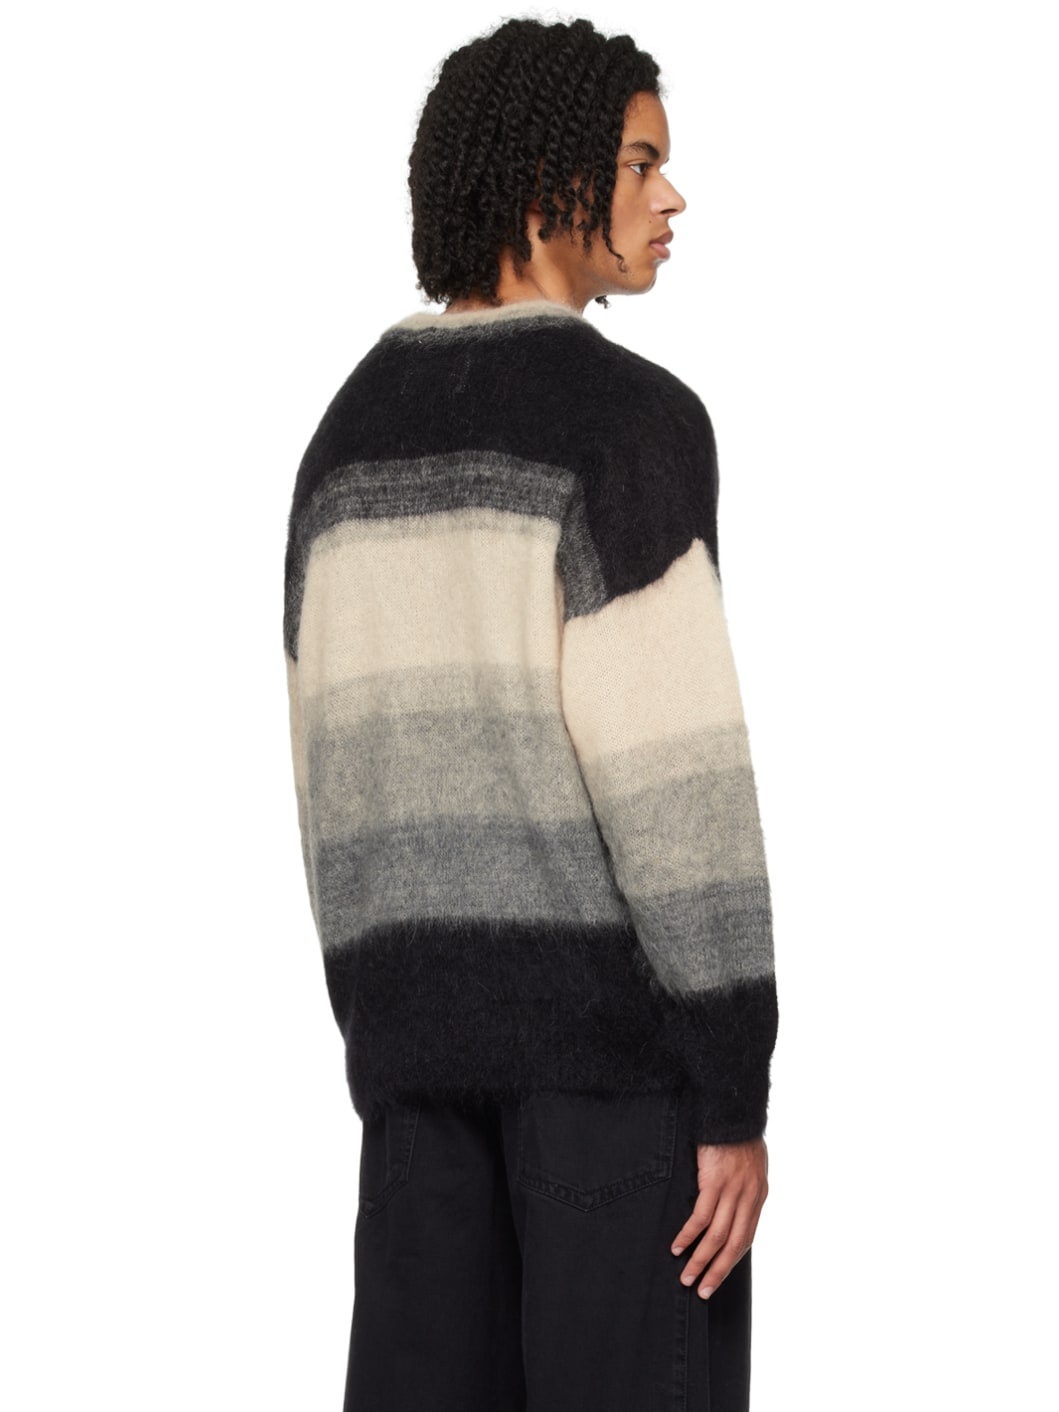 Isabel Marant Off-White & Black Drussellh Sweater | REVERSIBLE